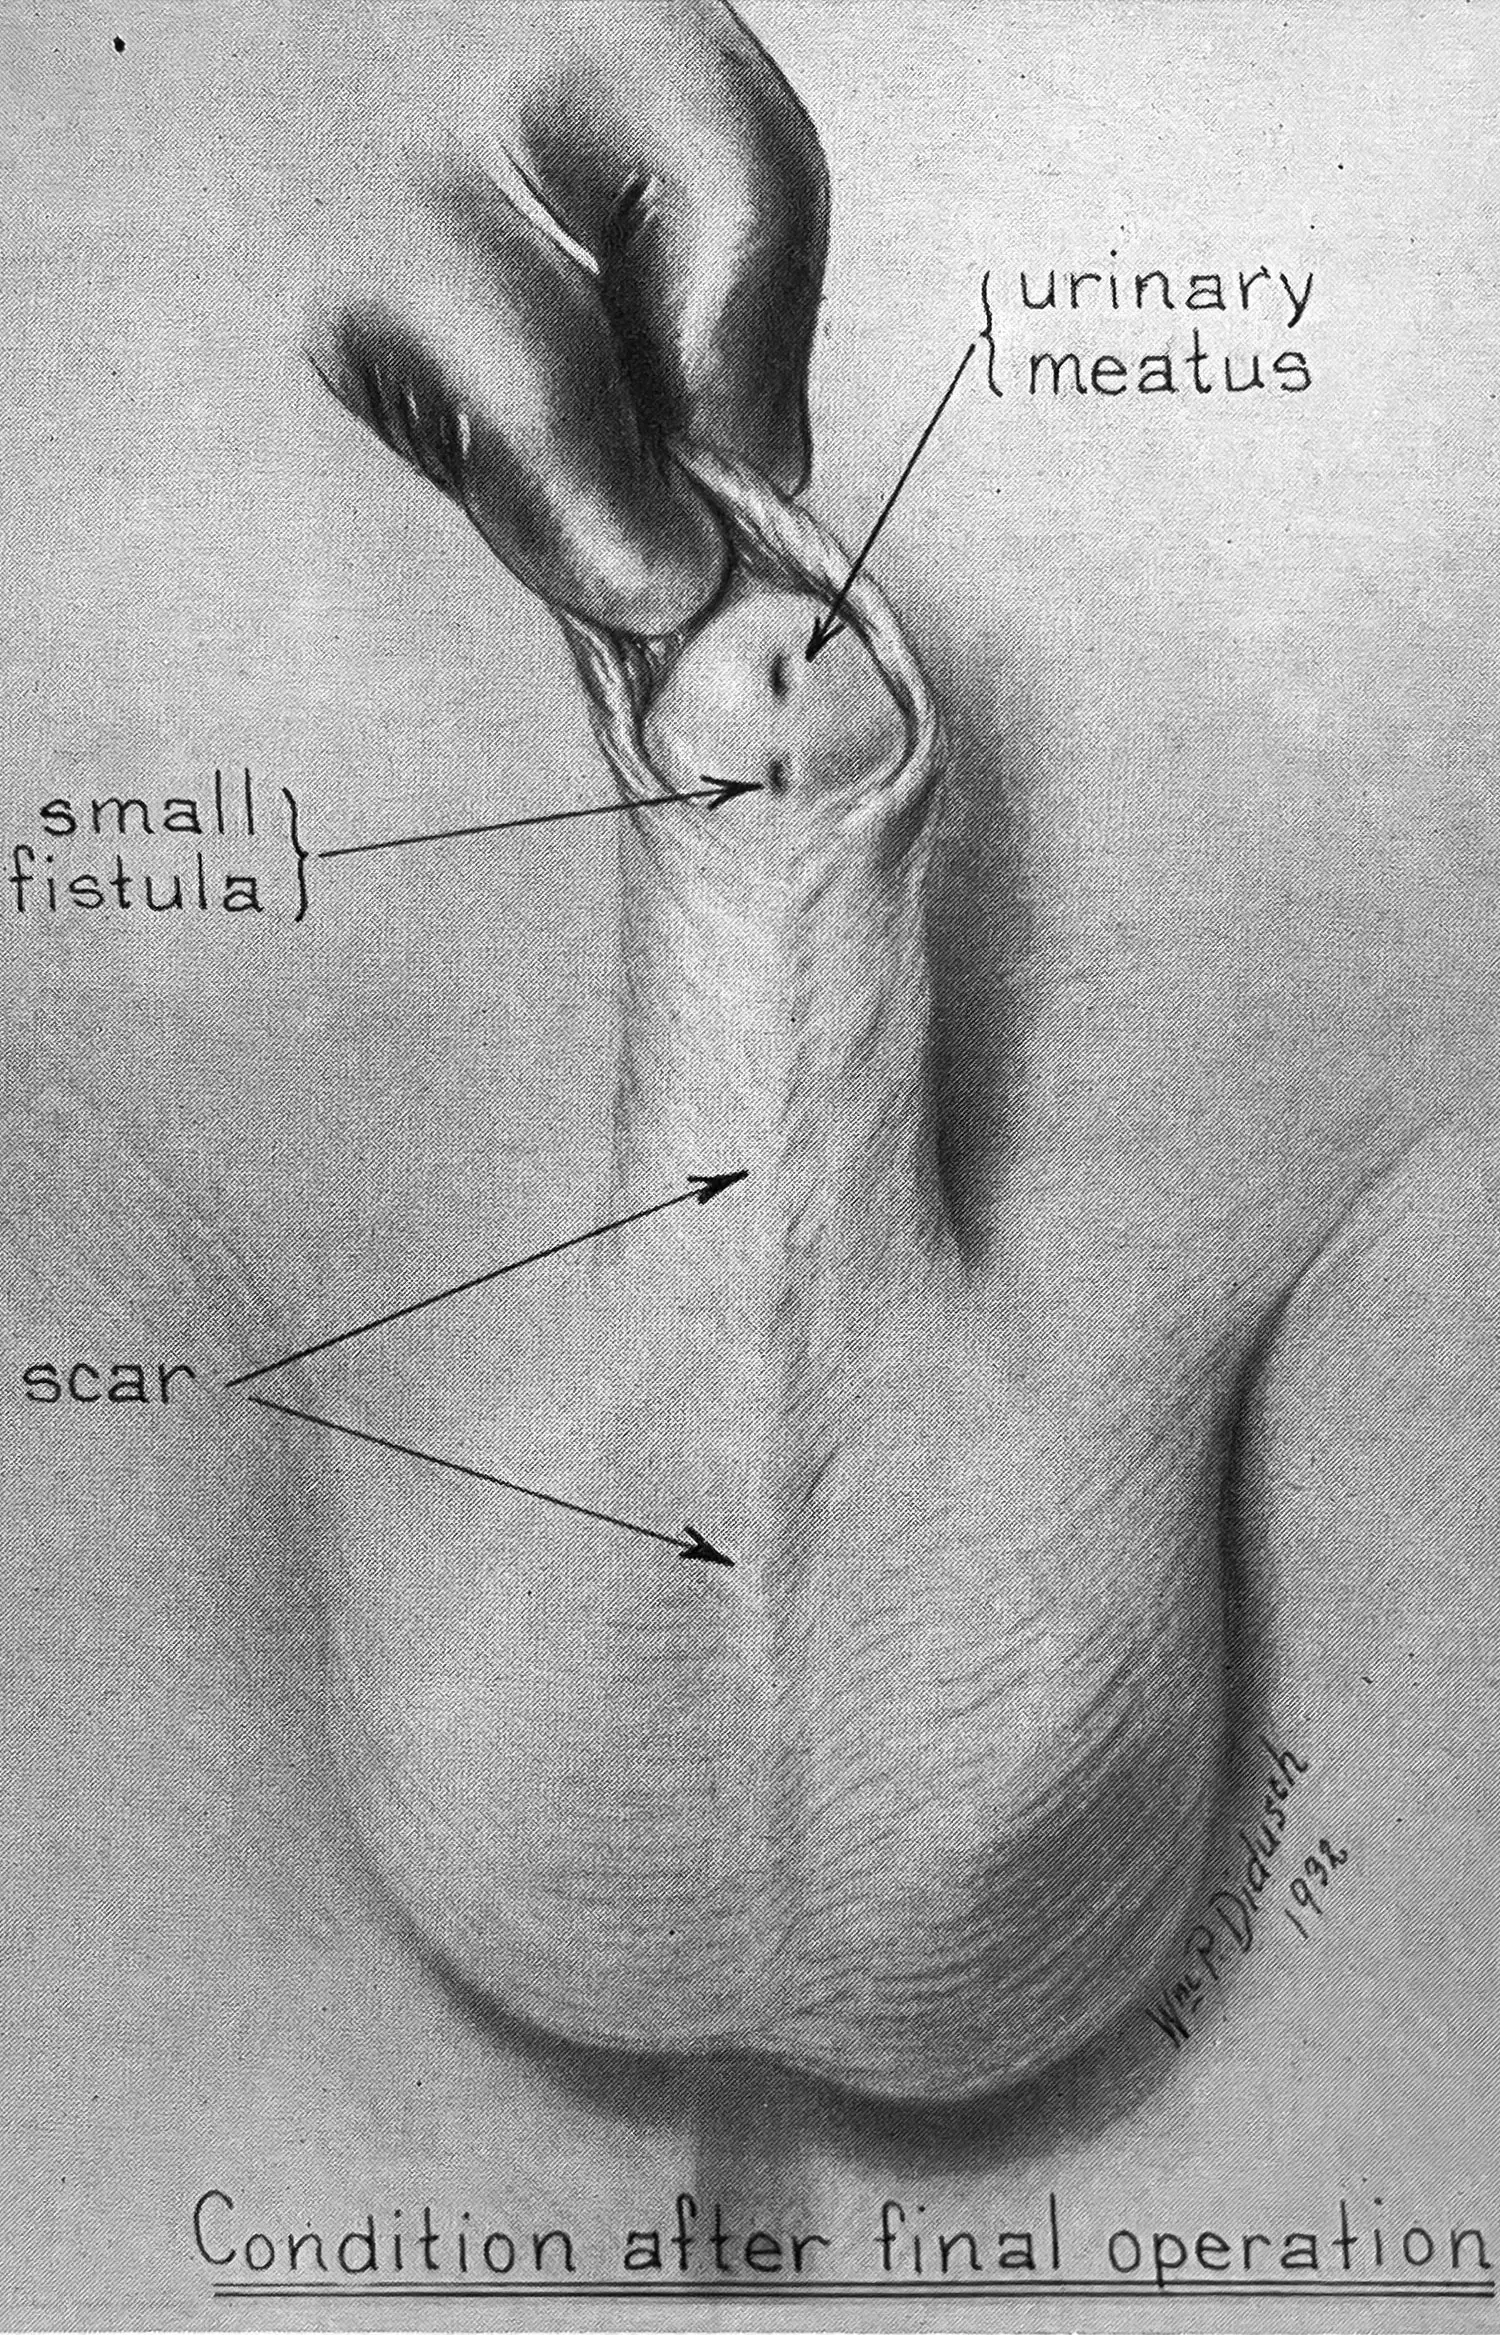 Medical illustration titled “Condition after final operation” shows a reconstructed penis, with annotations pointing to the “urinary meatus,” “scar,” and “small fistula.”